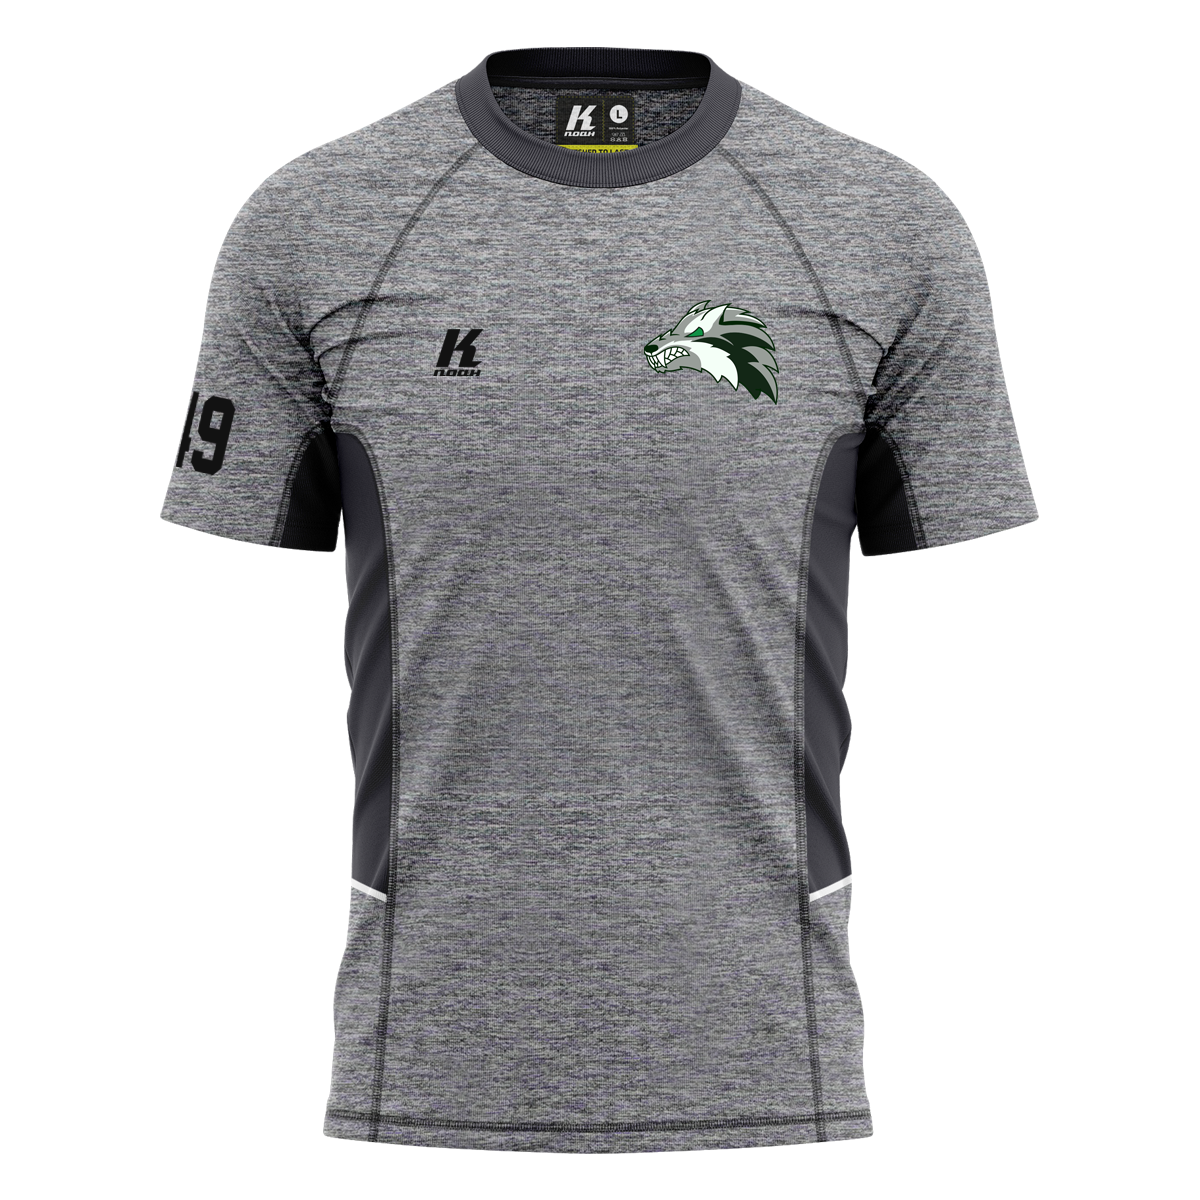 Wolves K.Tech-Fiber T-Shirt “Grindle” with Playernumber/Initials